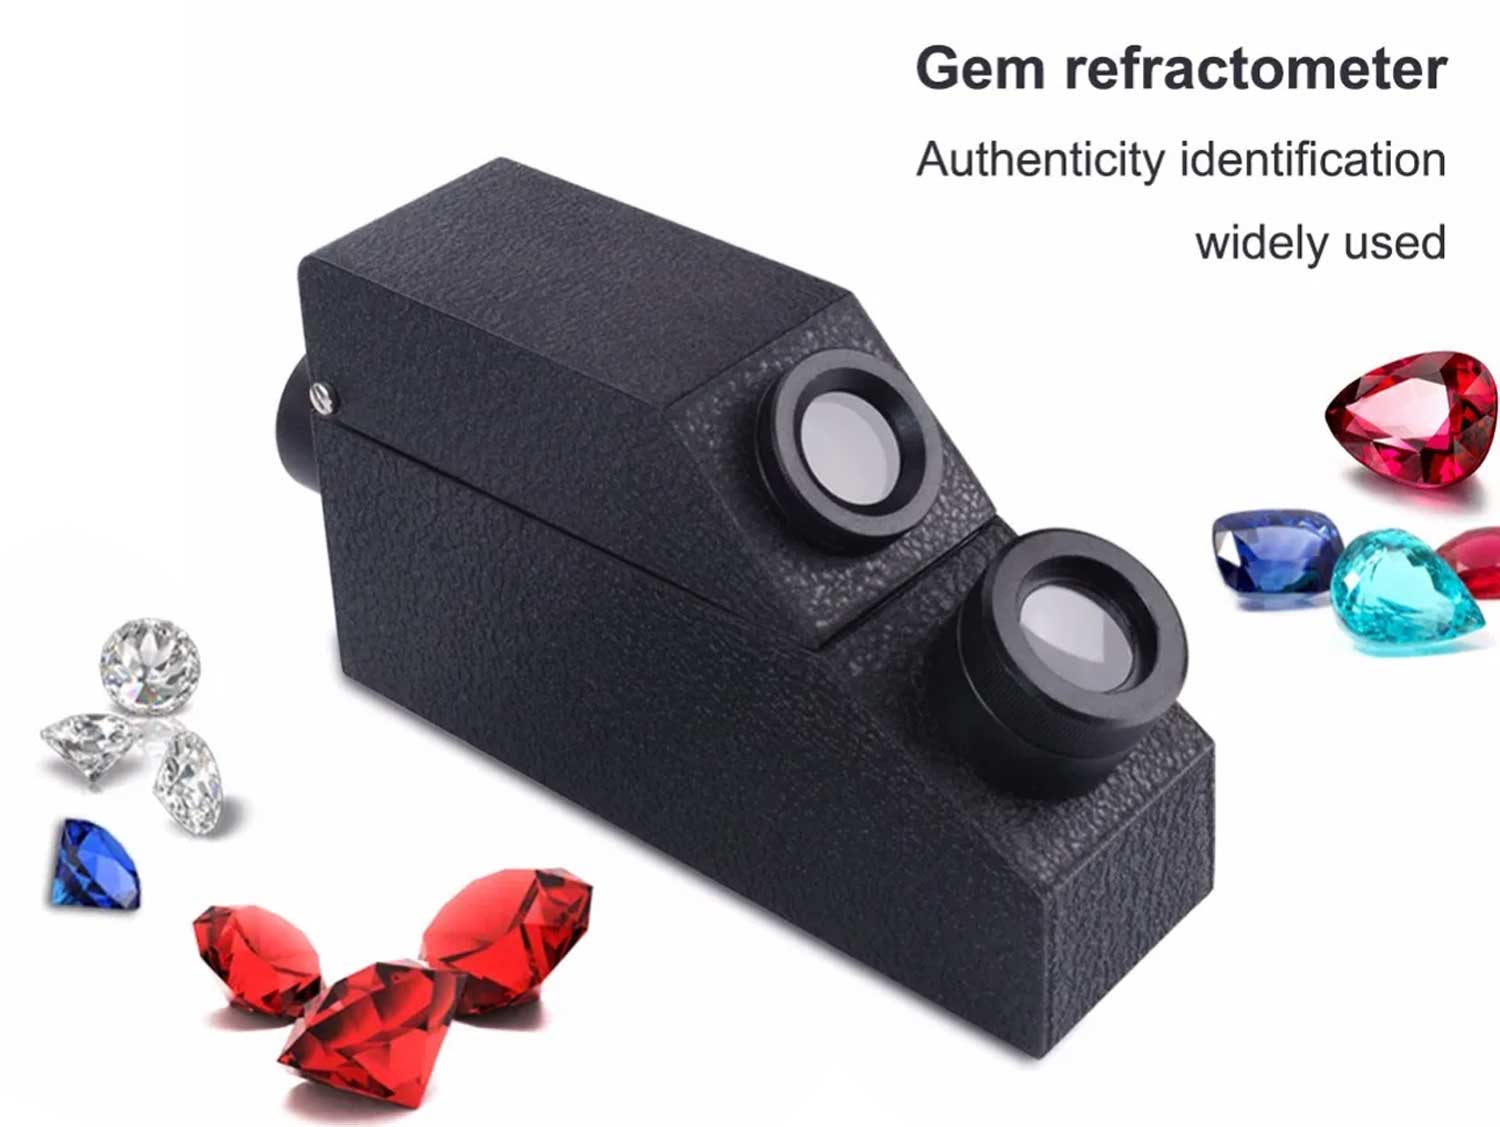 Compact and Portable Gem Refractometer in Use